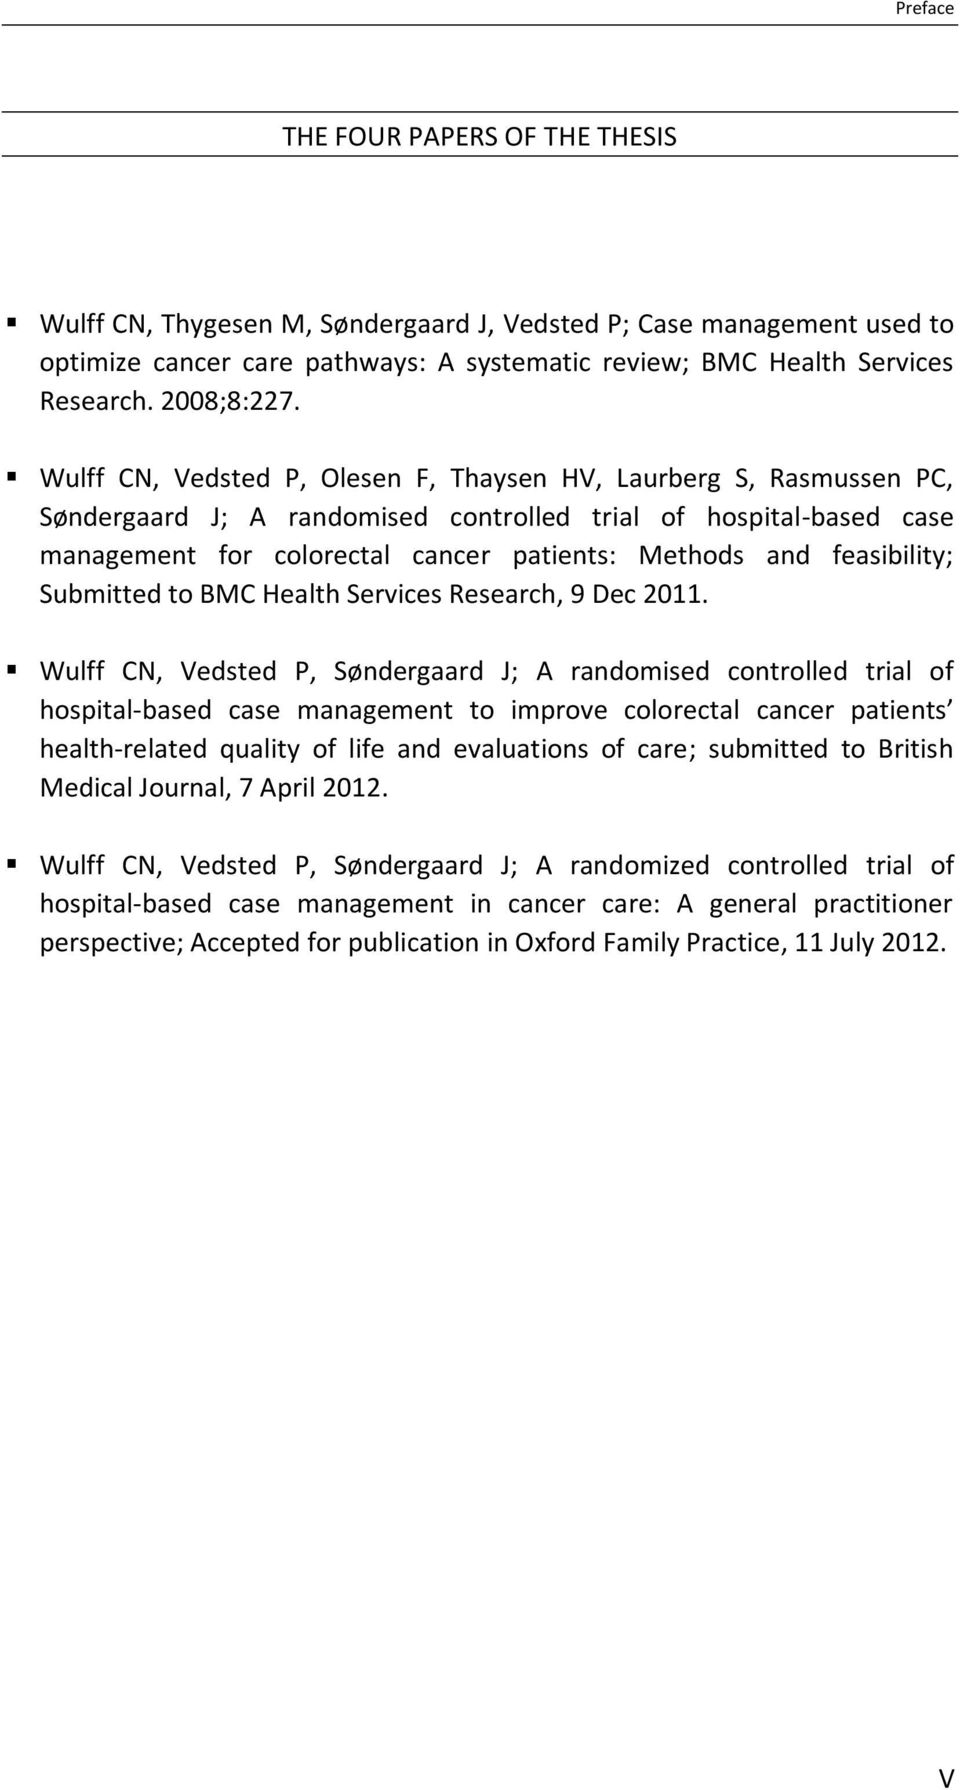 Wulff CN, Vedsted P, Olesen F, Thaysen HV, Laurberg S, Rasmussen PC, Søndergaard J; A randomised controlled trial of hospital-based case management for colorectal cancer patients: Methods and